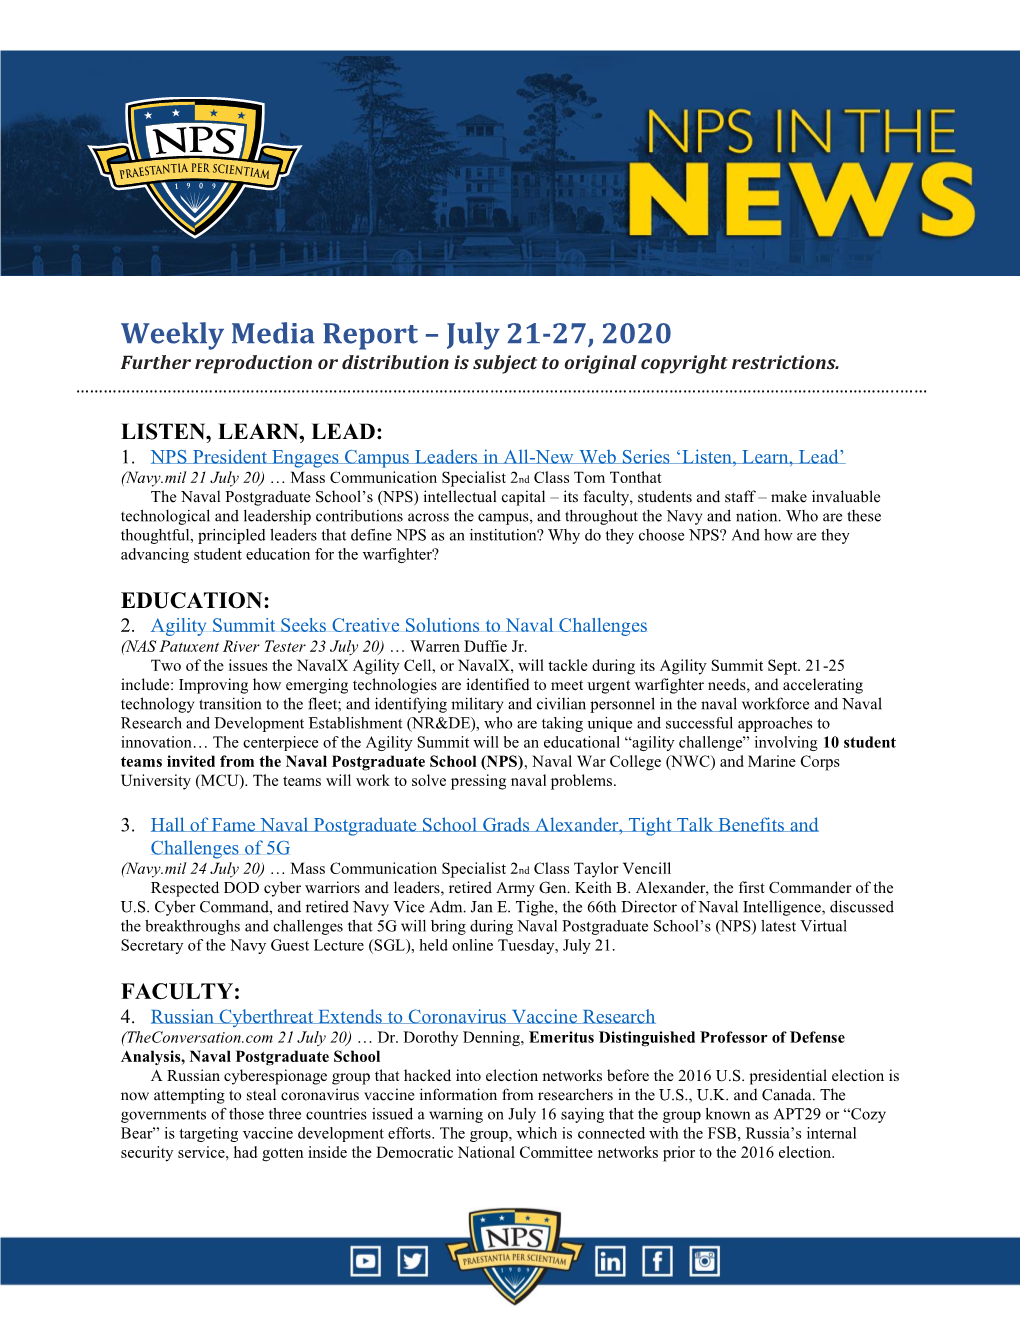 Weekly Media Report – July 21-27, 2020 Further Reproduction Or Distribution Is Subject to Original Copyright Restrictions